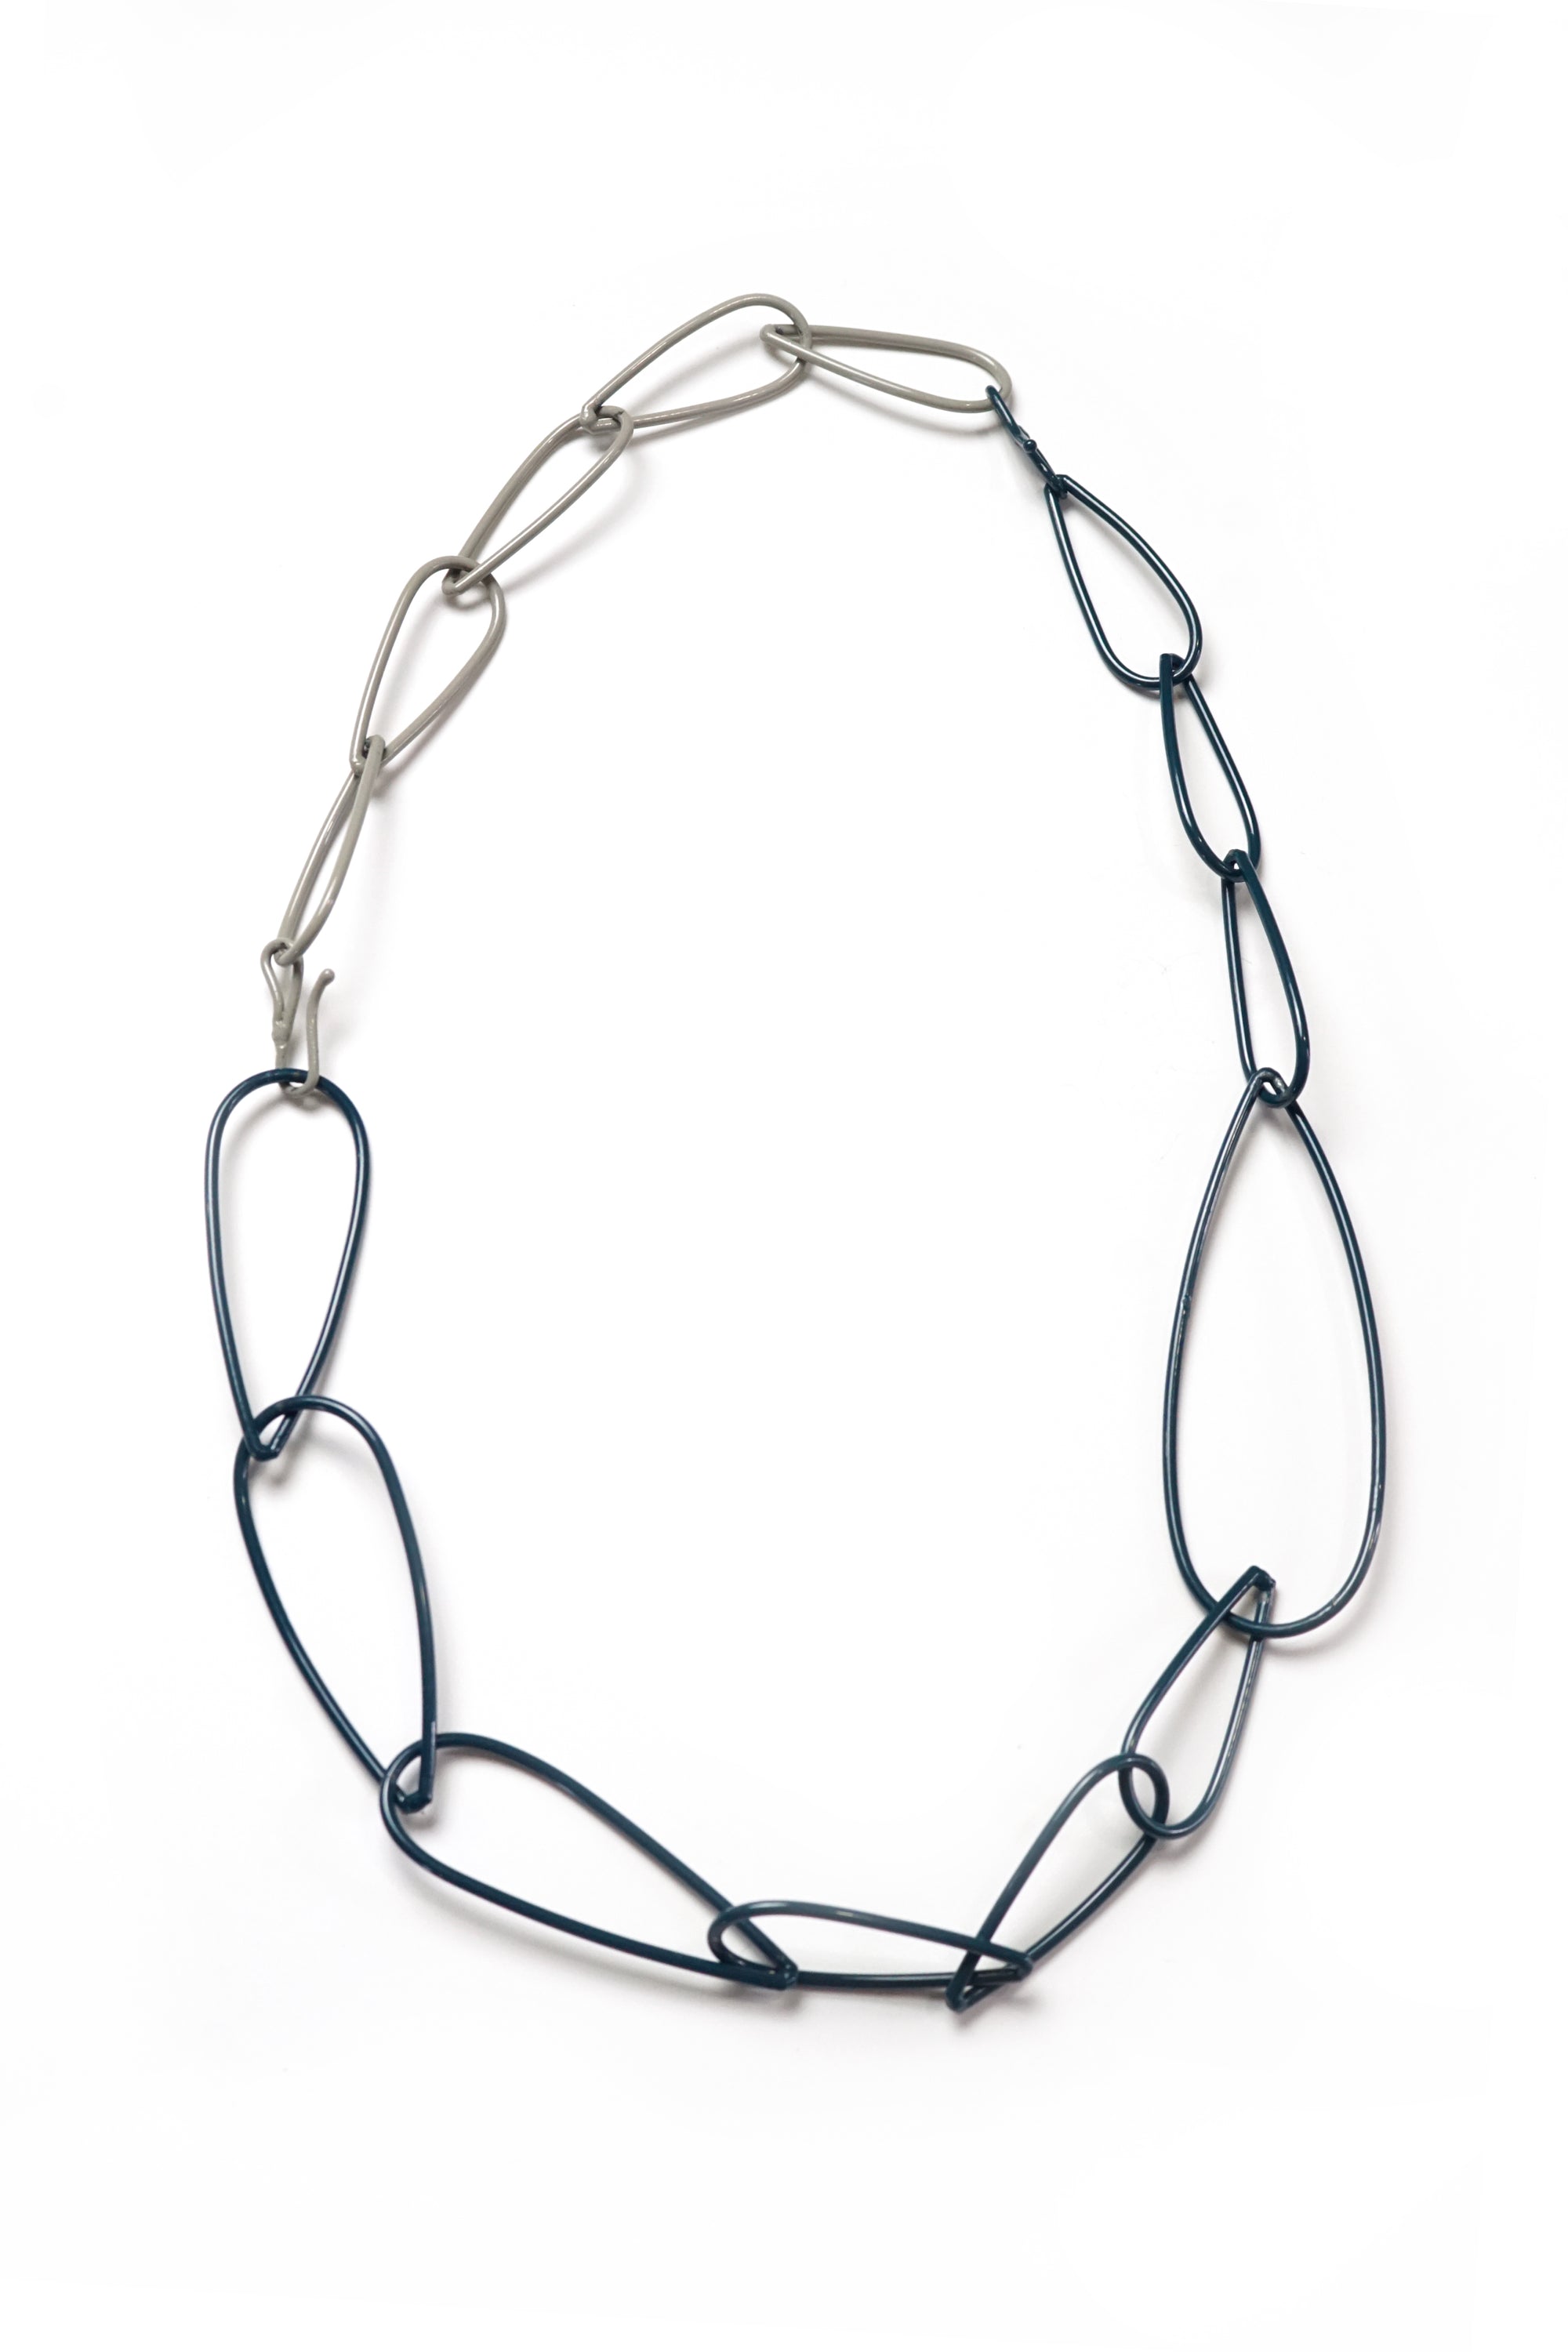 Modular Necklace in Deep Ocean and Stone Grey